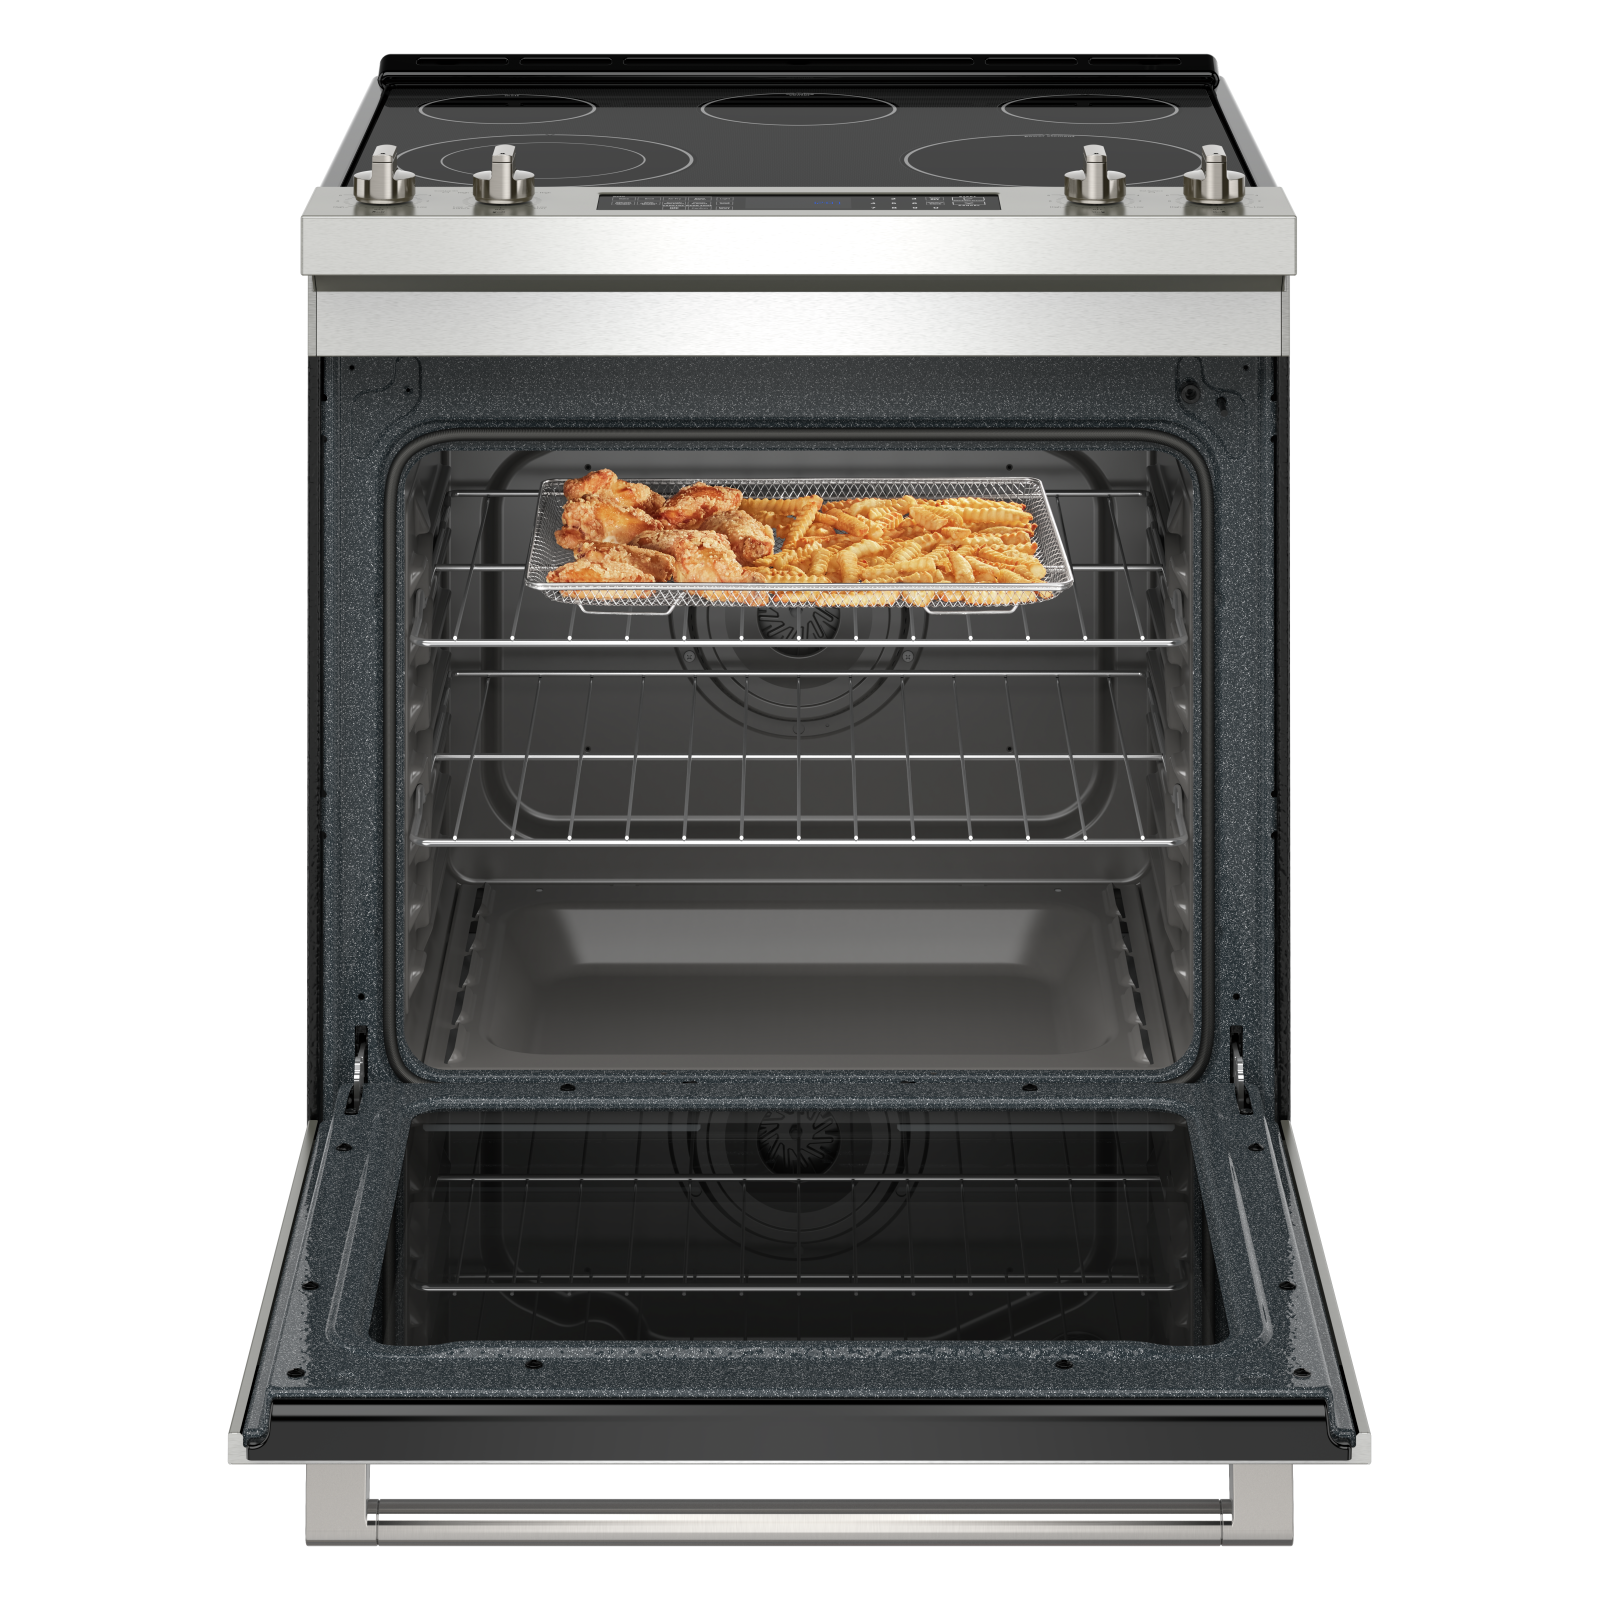 Maytag - 6.4 cu. ft  Electric Range in Stainless - YMES8800PZ